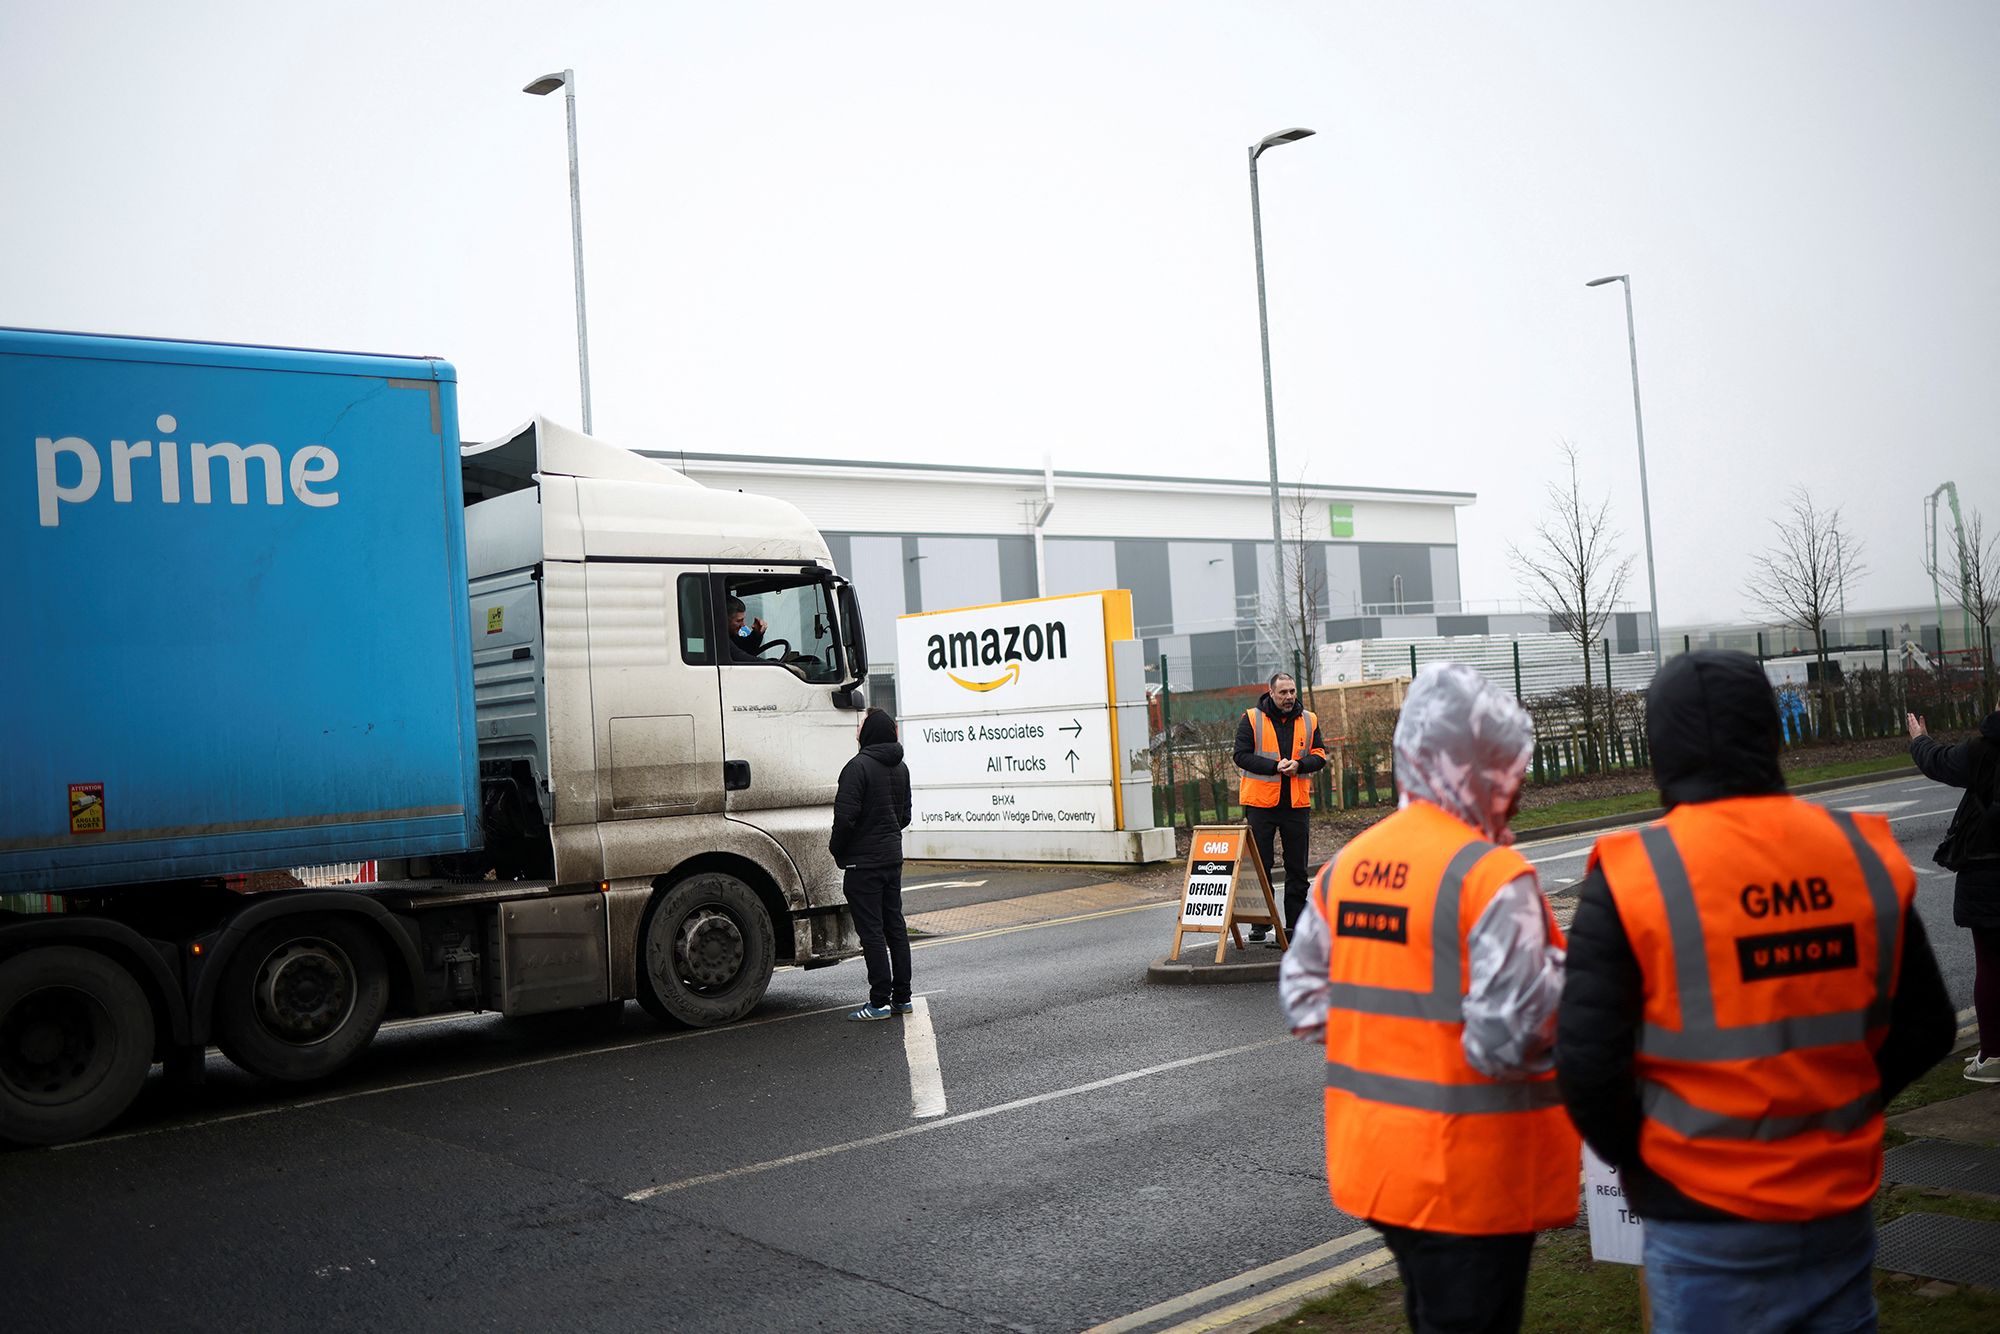 Amazon workers at a warehouse in central England went on strike Wednesday, the first time employees of the US tech giant have walked out in the country.